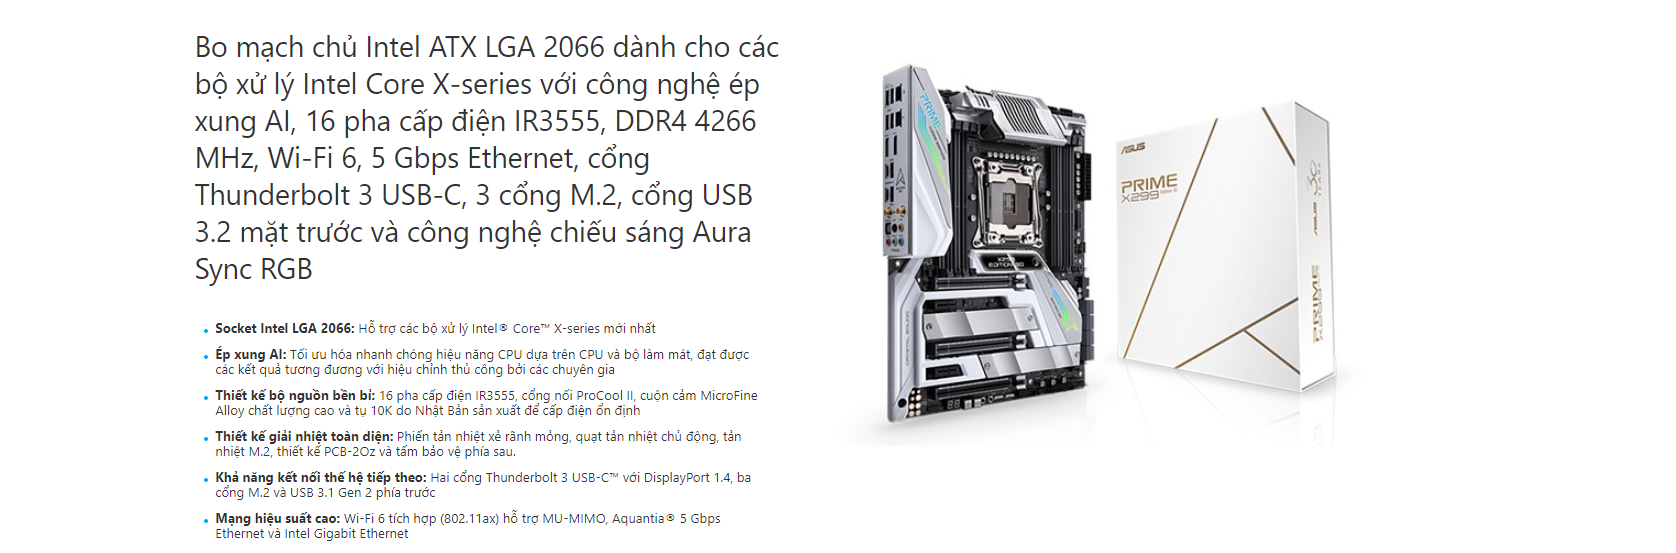 1 X299 edition 30 asus songphuong.vn